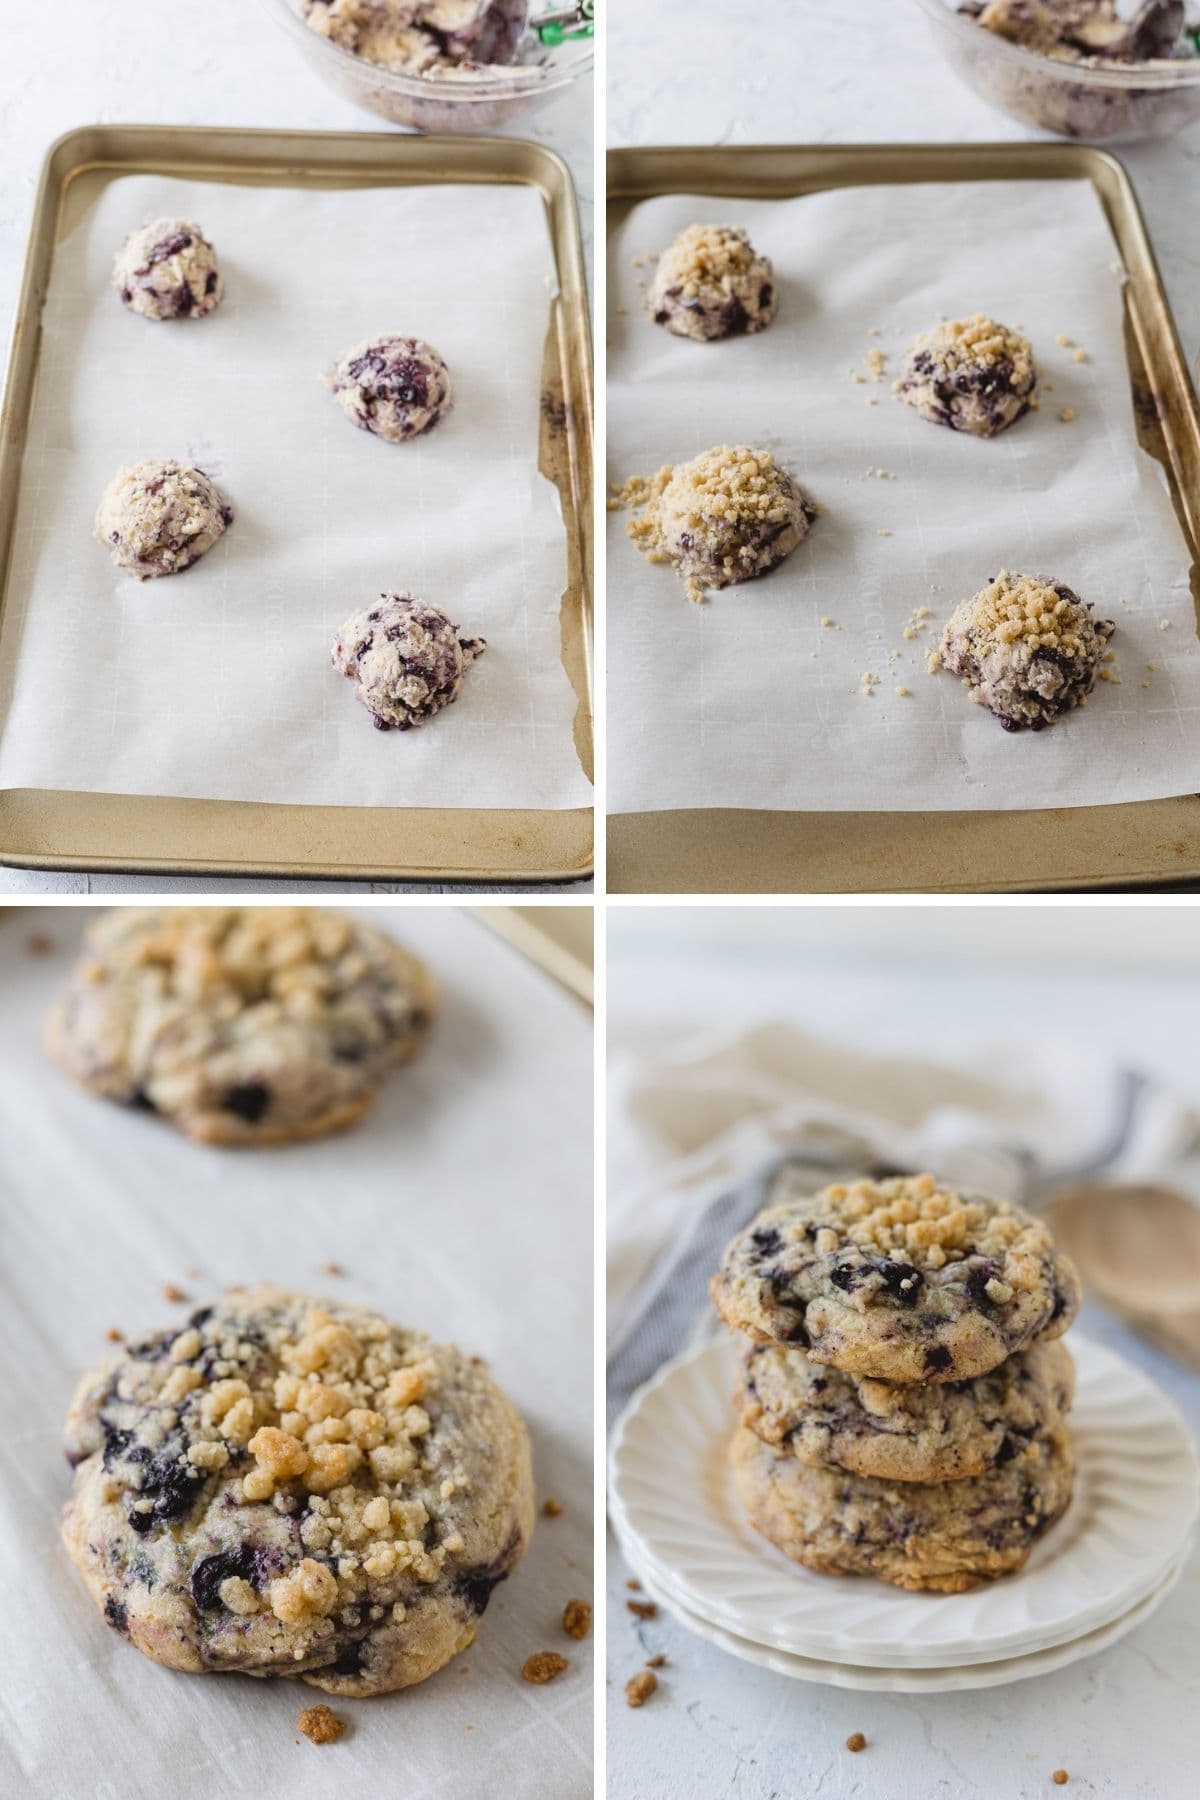 Crumbl blueberry muffin cookies ready to bake on a sheet pan and the final baked cookies.